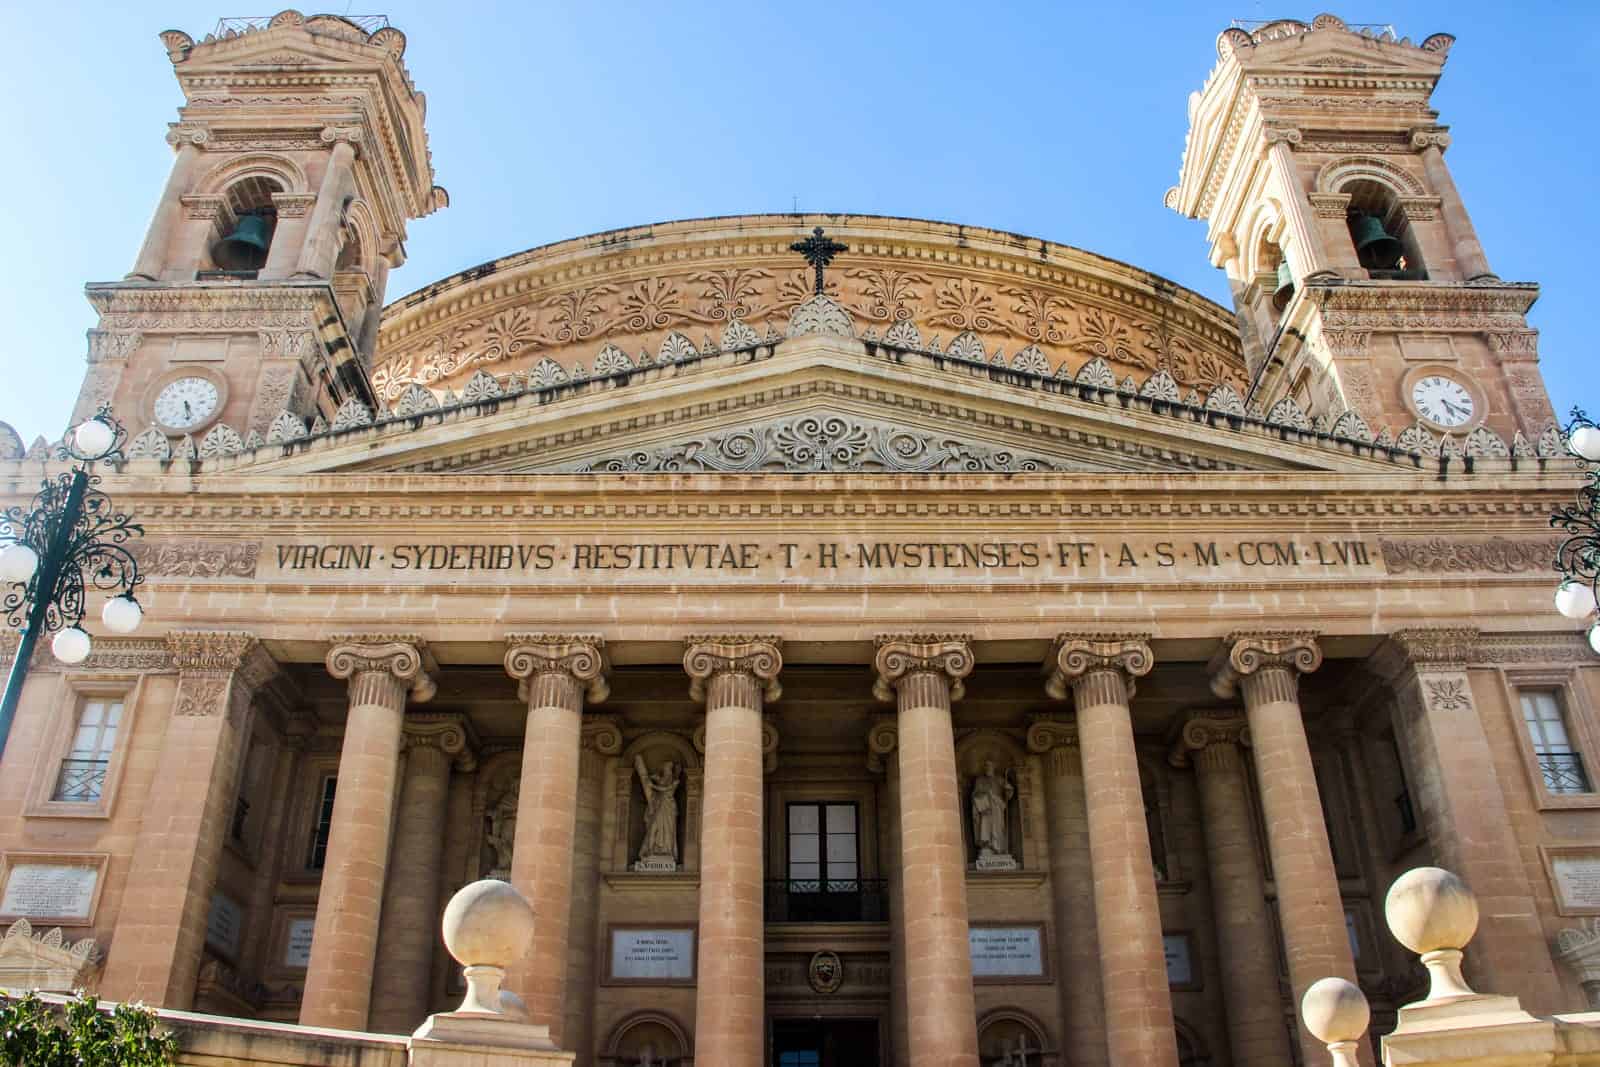 The front facade of Mosta Dome in Malta which was once bombed during the war